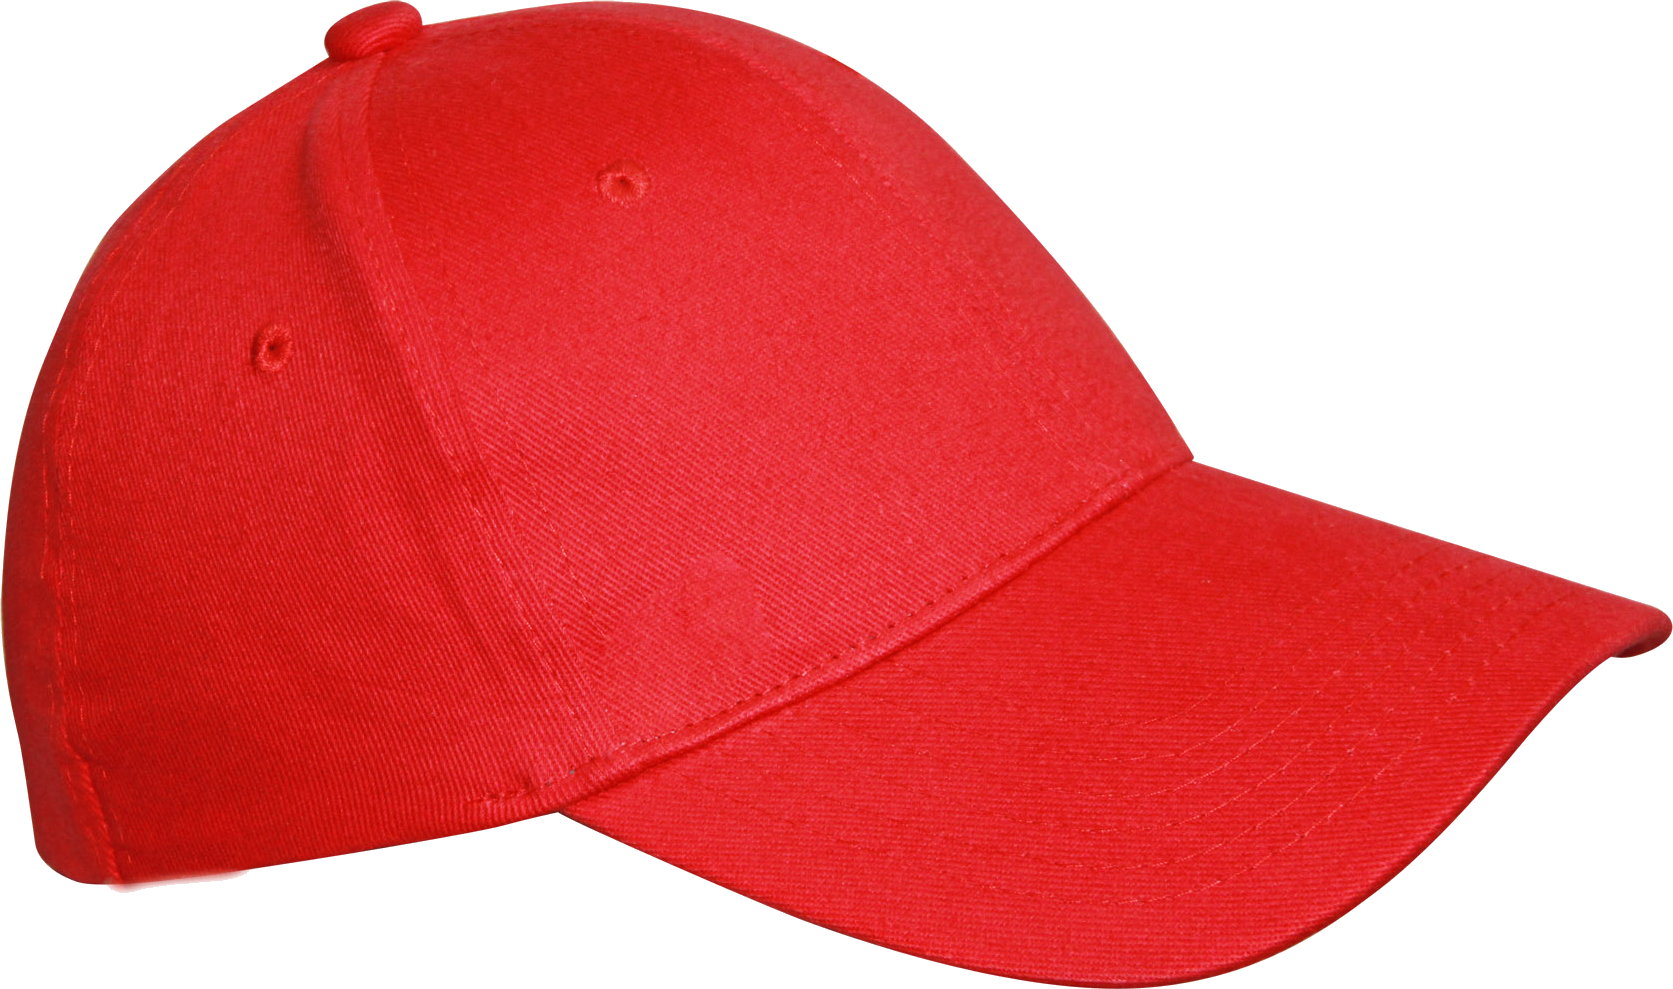 Red Cap PNG HD Quality